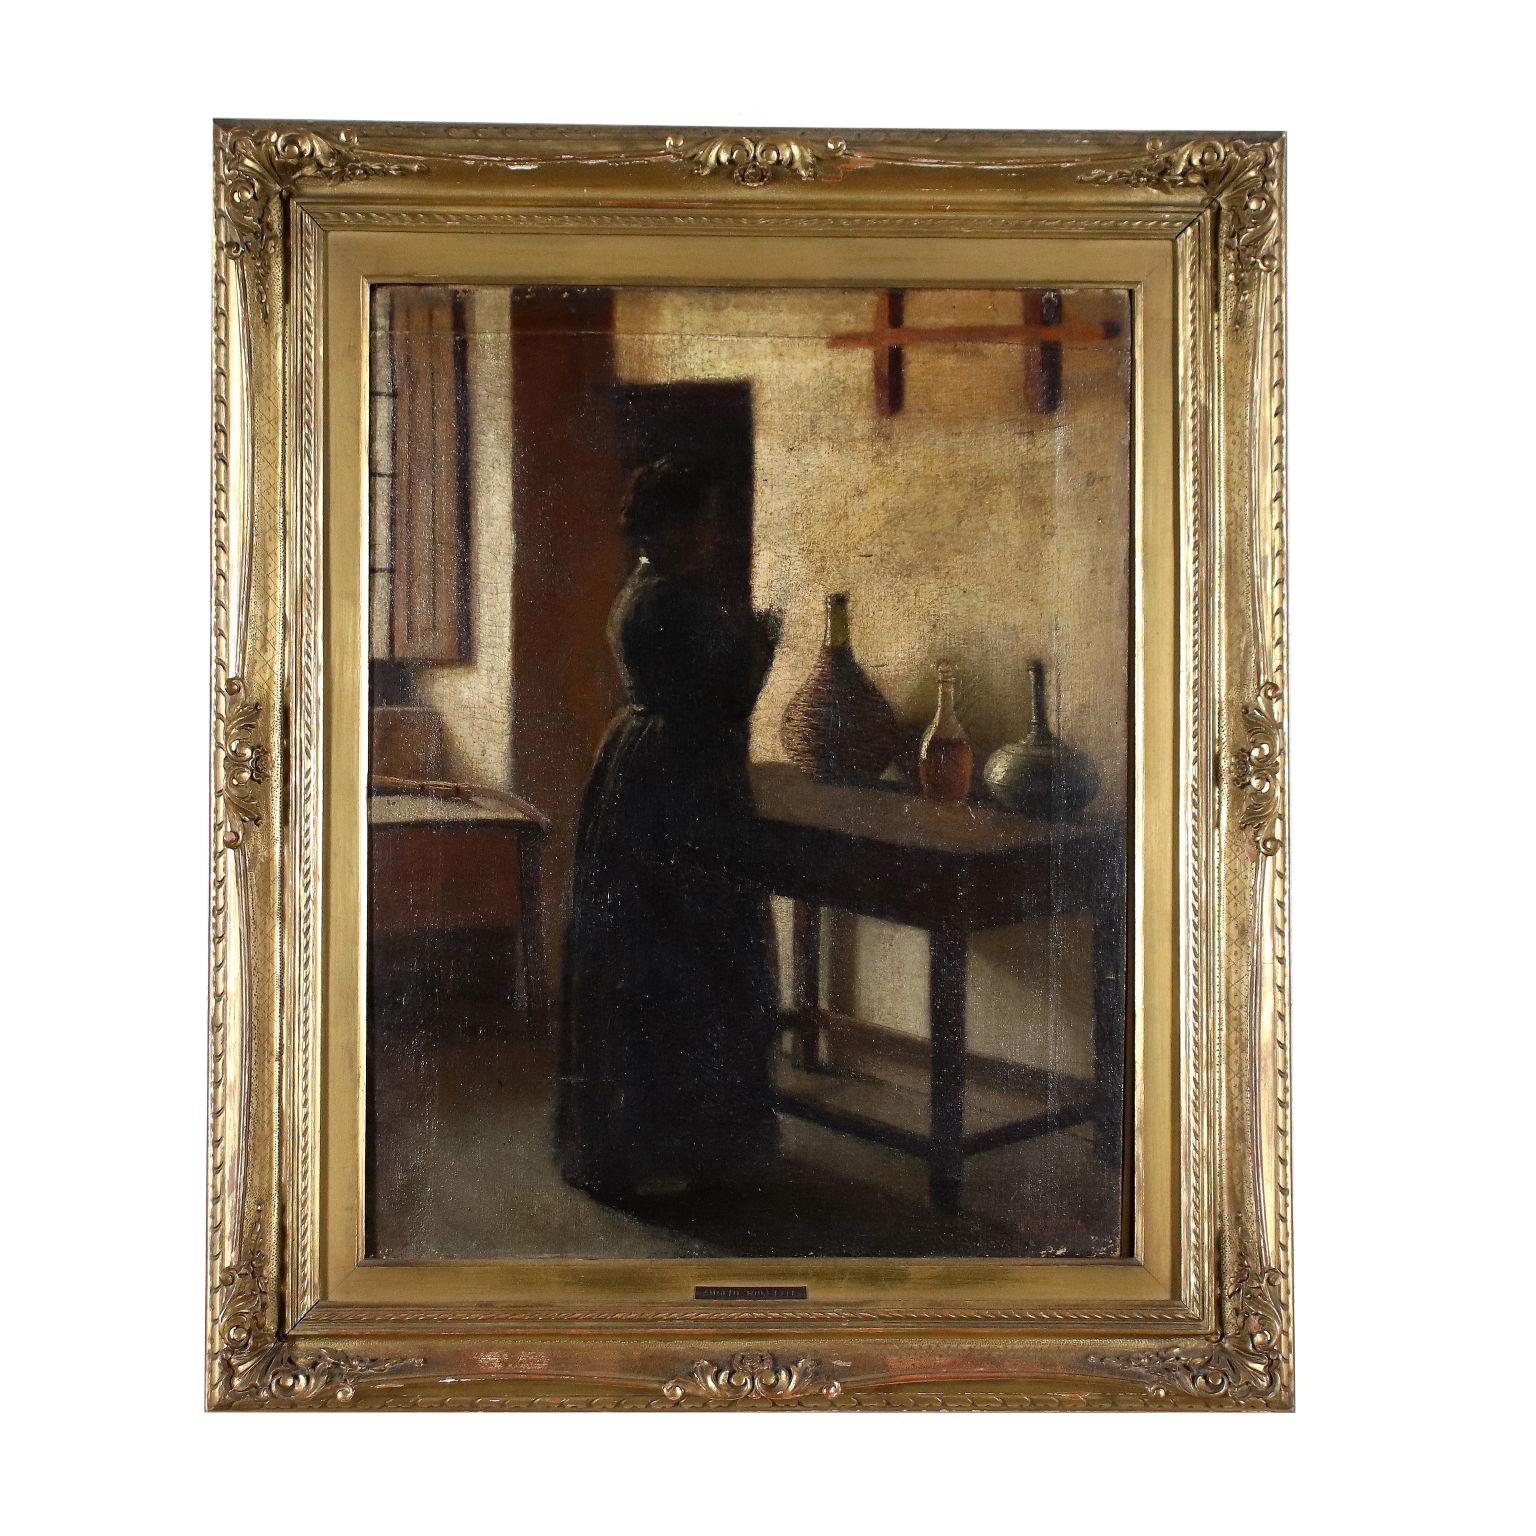 Unknown Figurative Painting - Female Figure in Interior, second half of 1800, oil on canvas